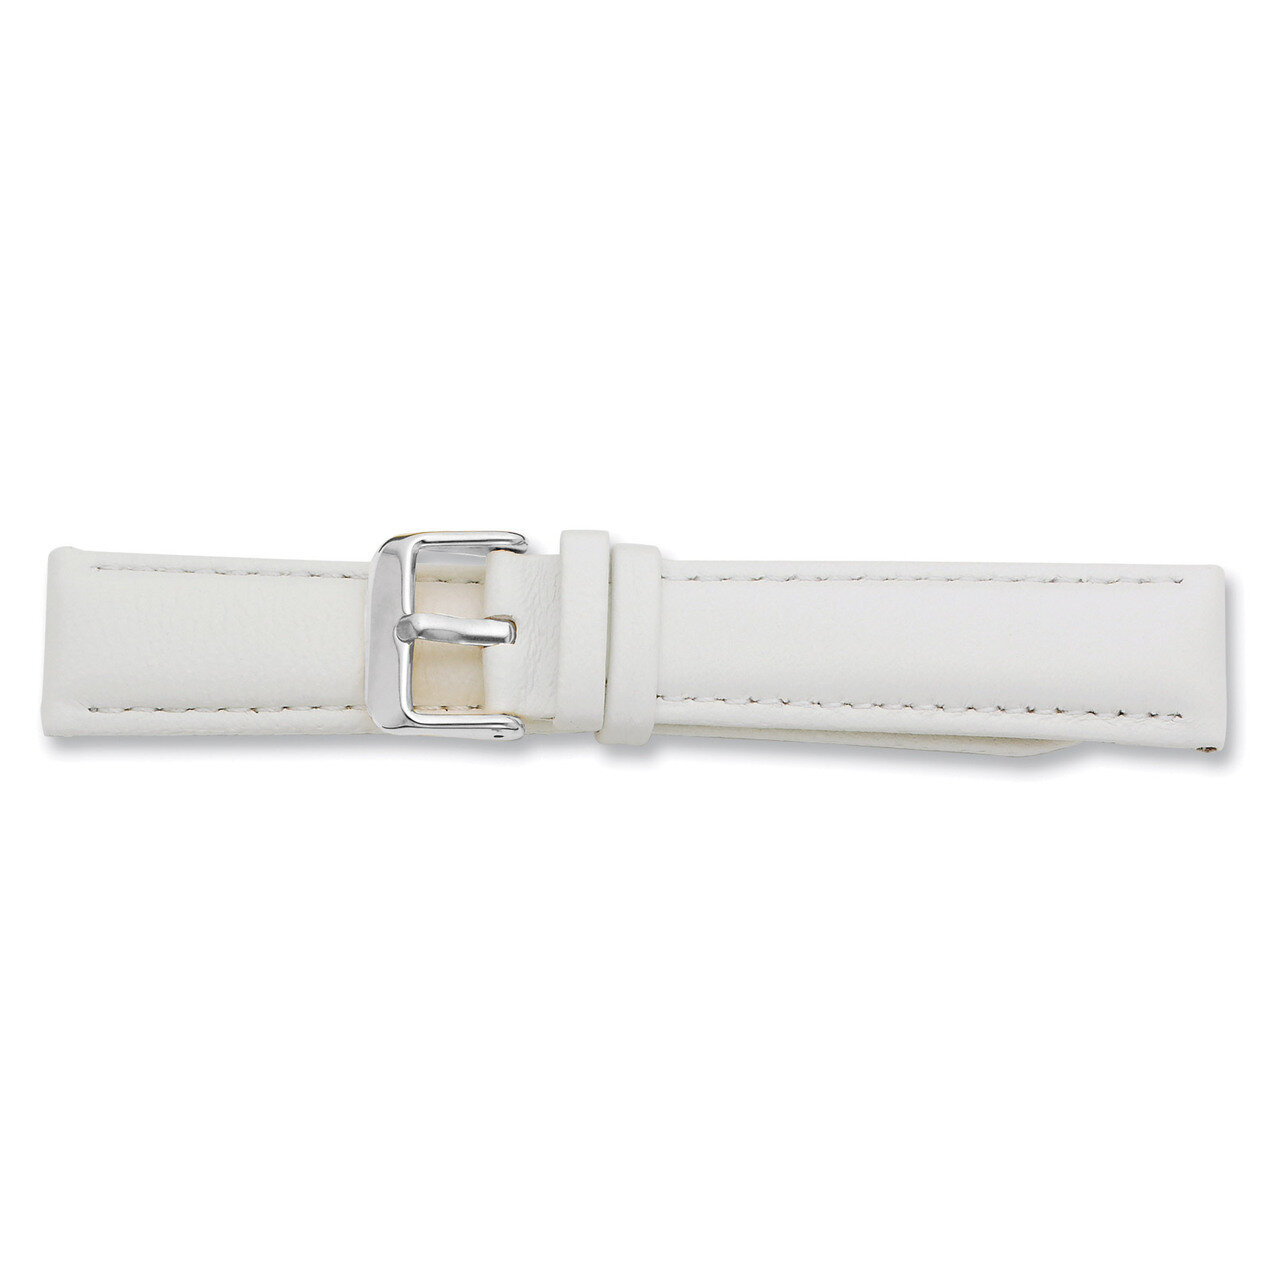 18mm White Glove Leather Watch Band 7.75 Inch Silver-tone Buckle BAW197-18